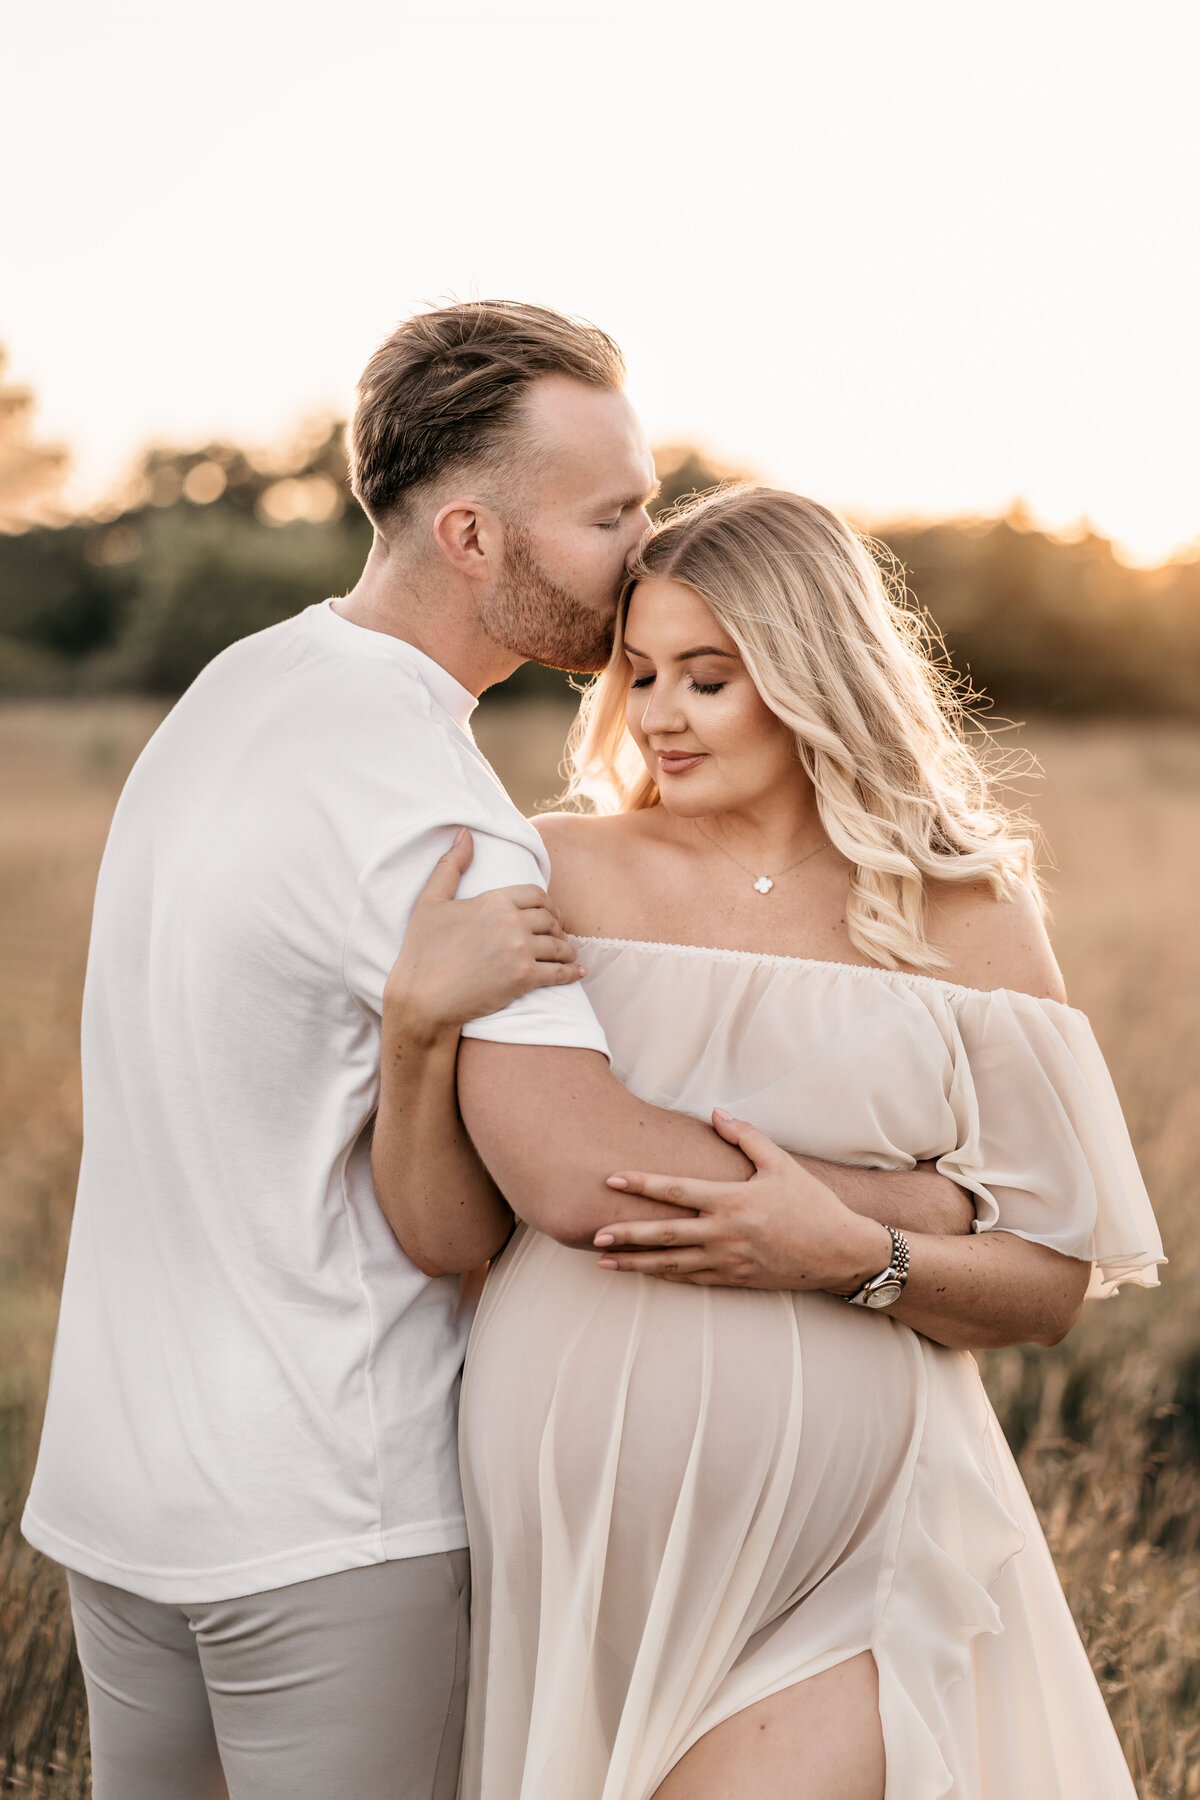 Photo of a pregnant woman and her husband at sunset